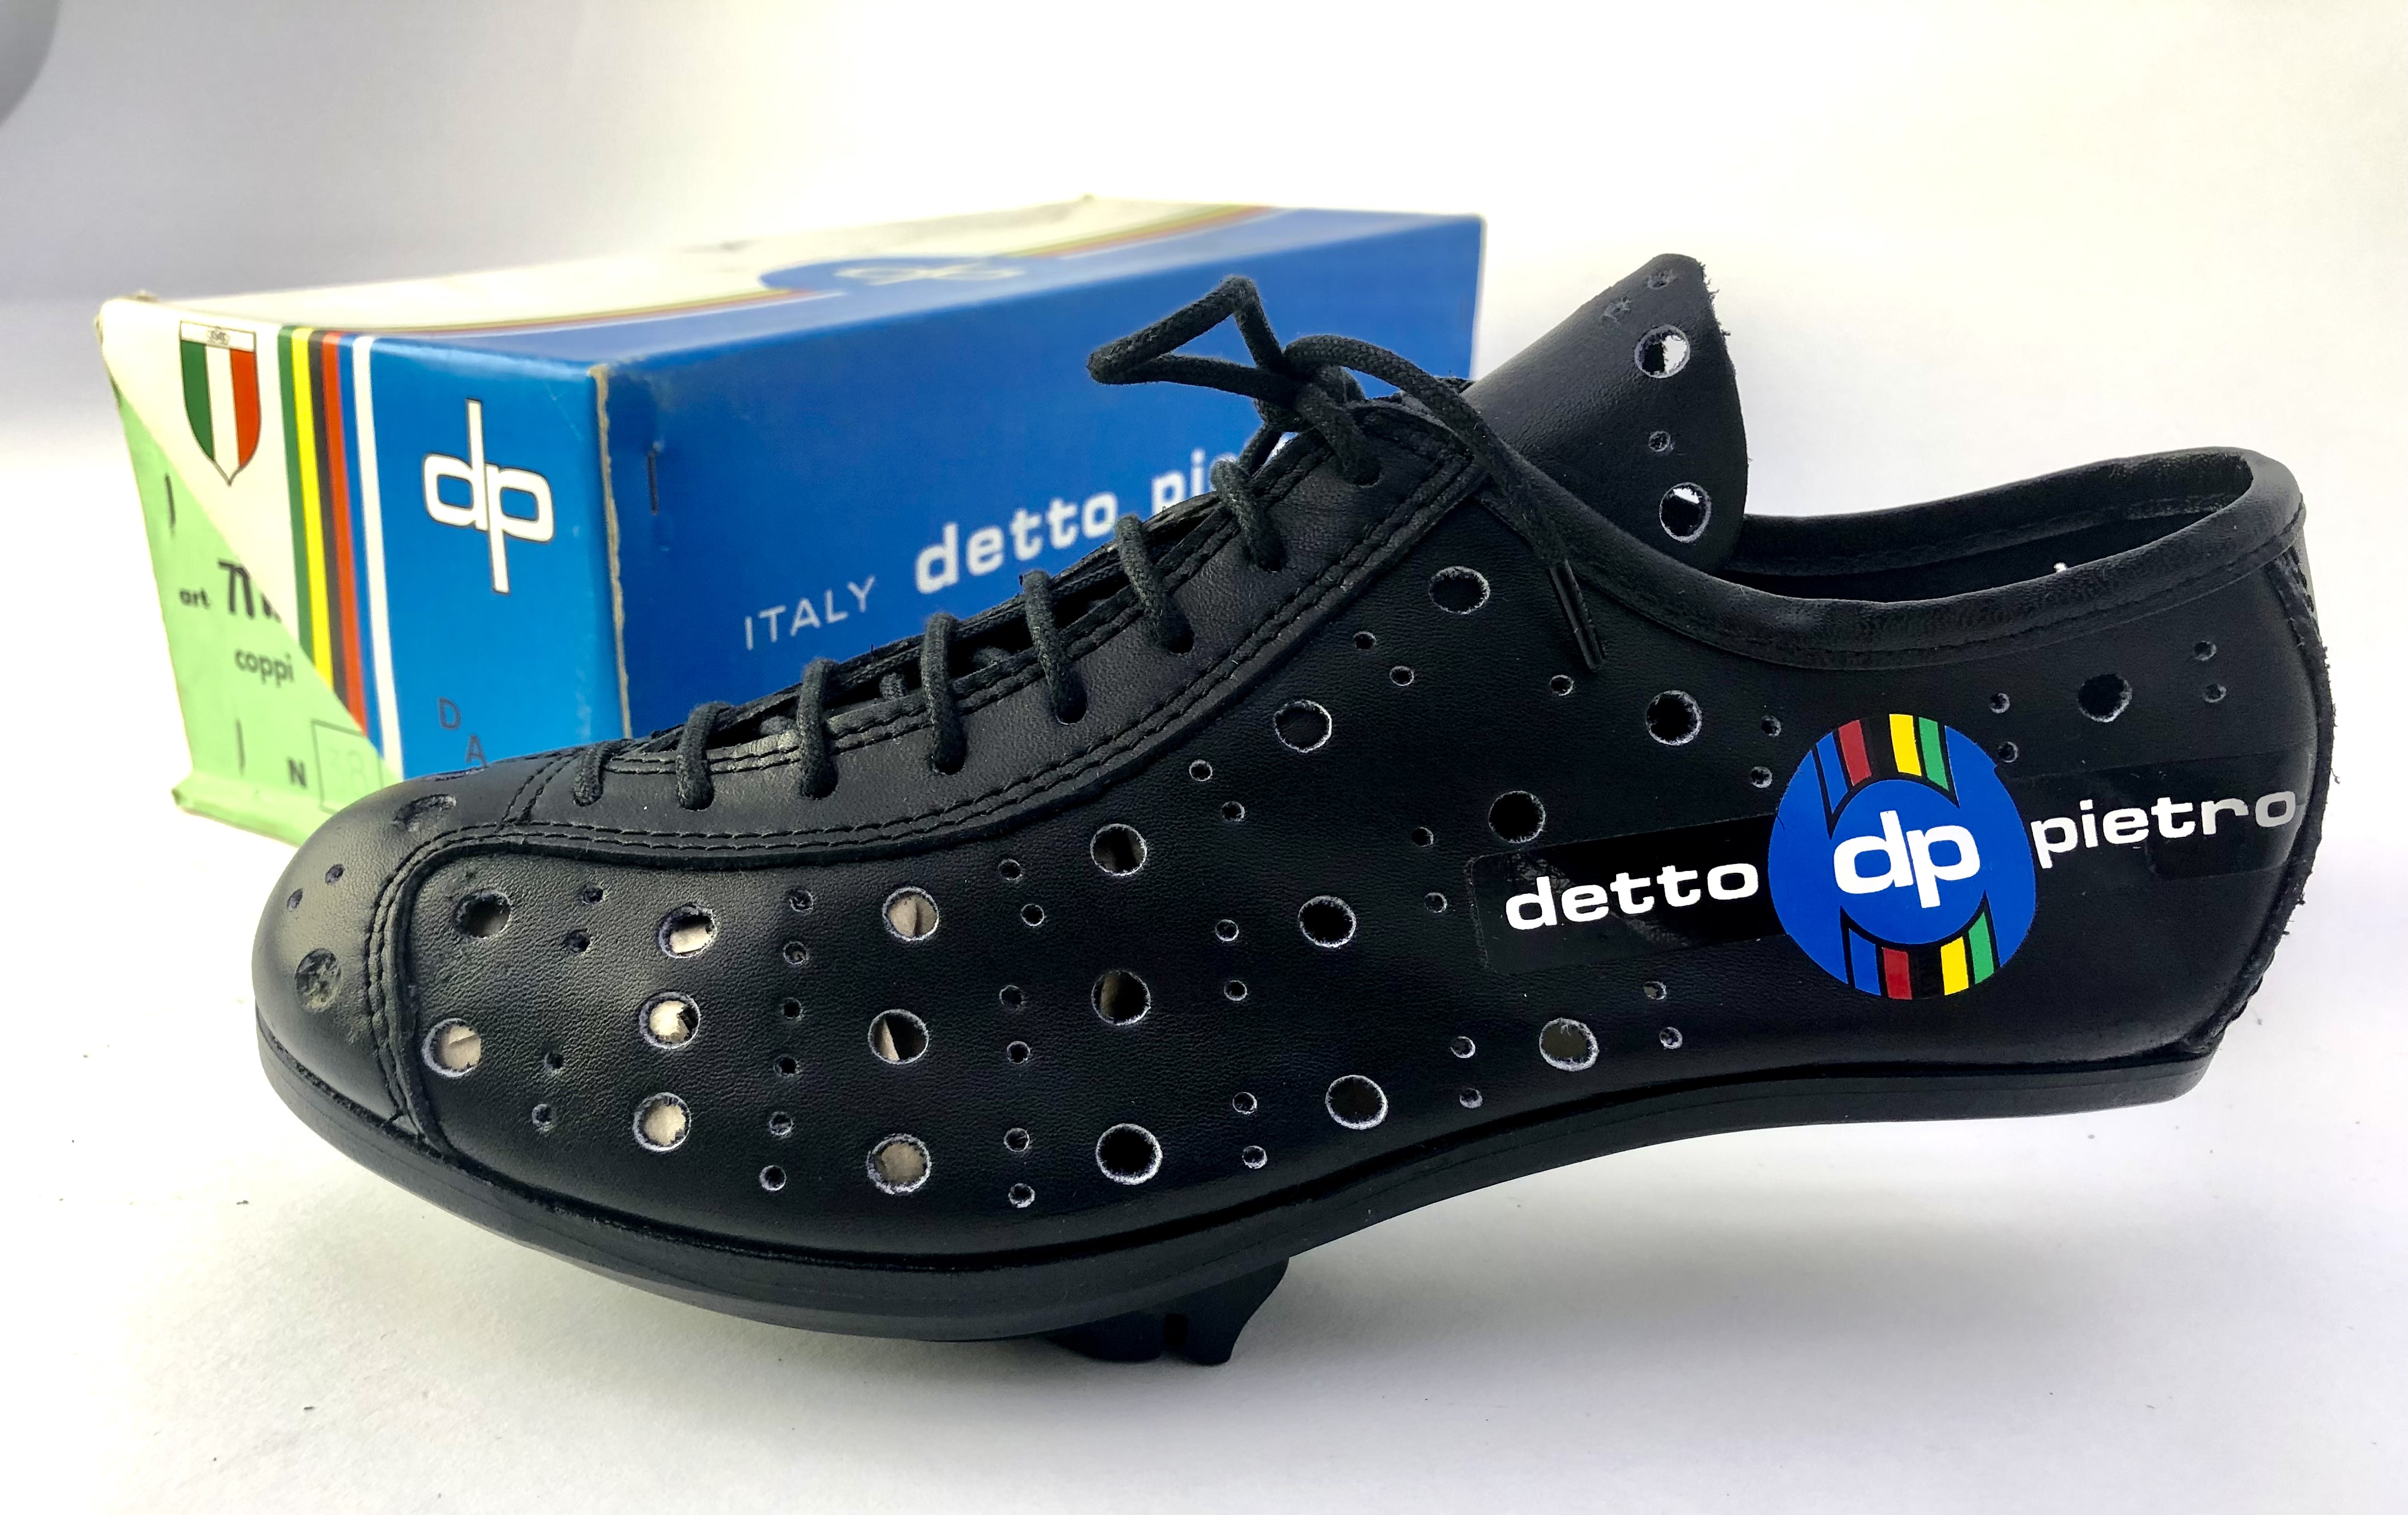 NOS Vintage Detto Pietro 7 TAR coppi Cycling Shoes Size 39